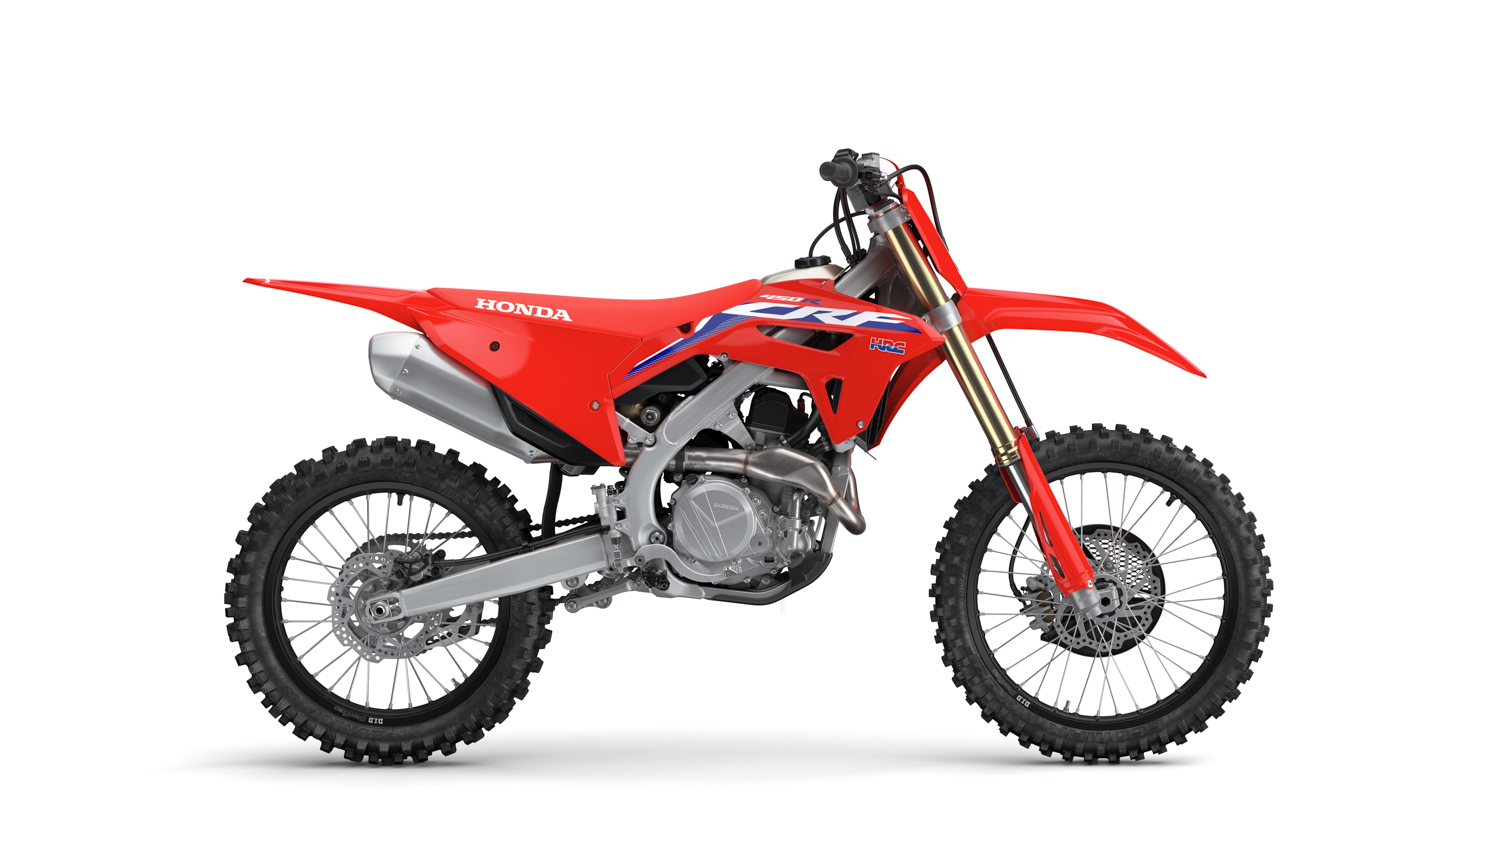 Admire And Covet This Production Honda CRF450 Supermoto Because You Can't  Have It